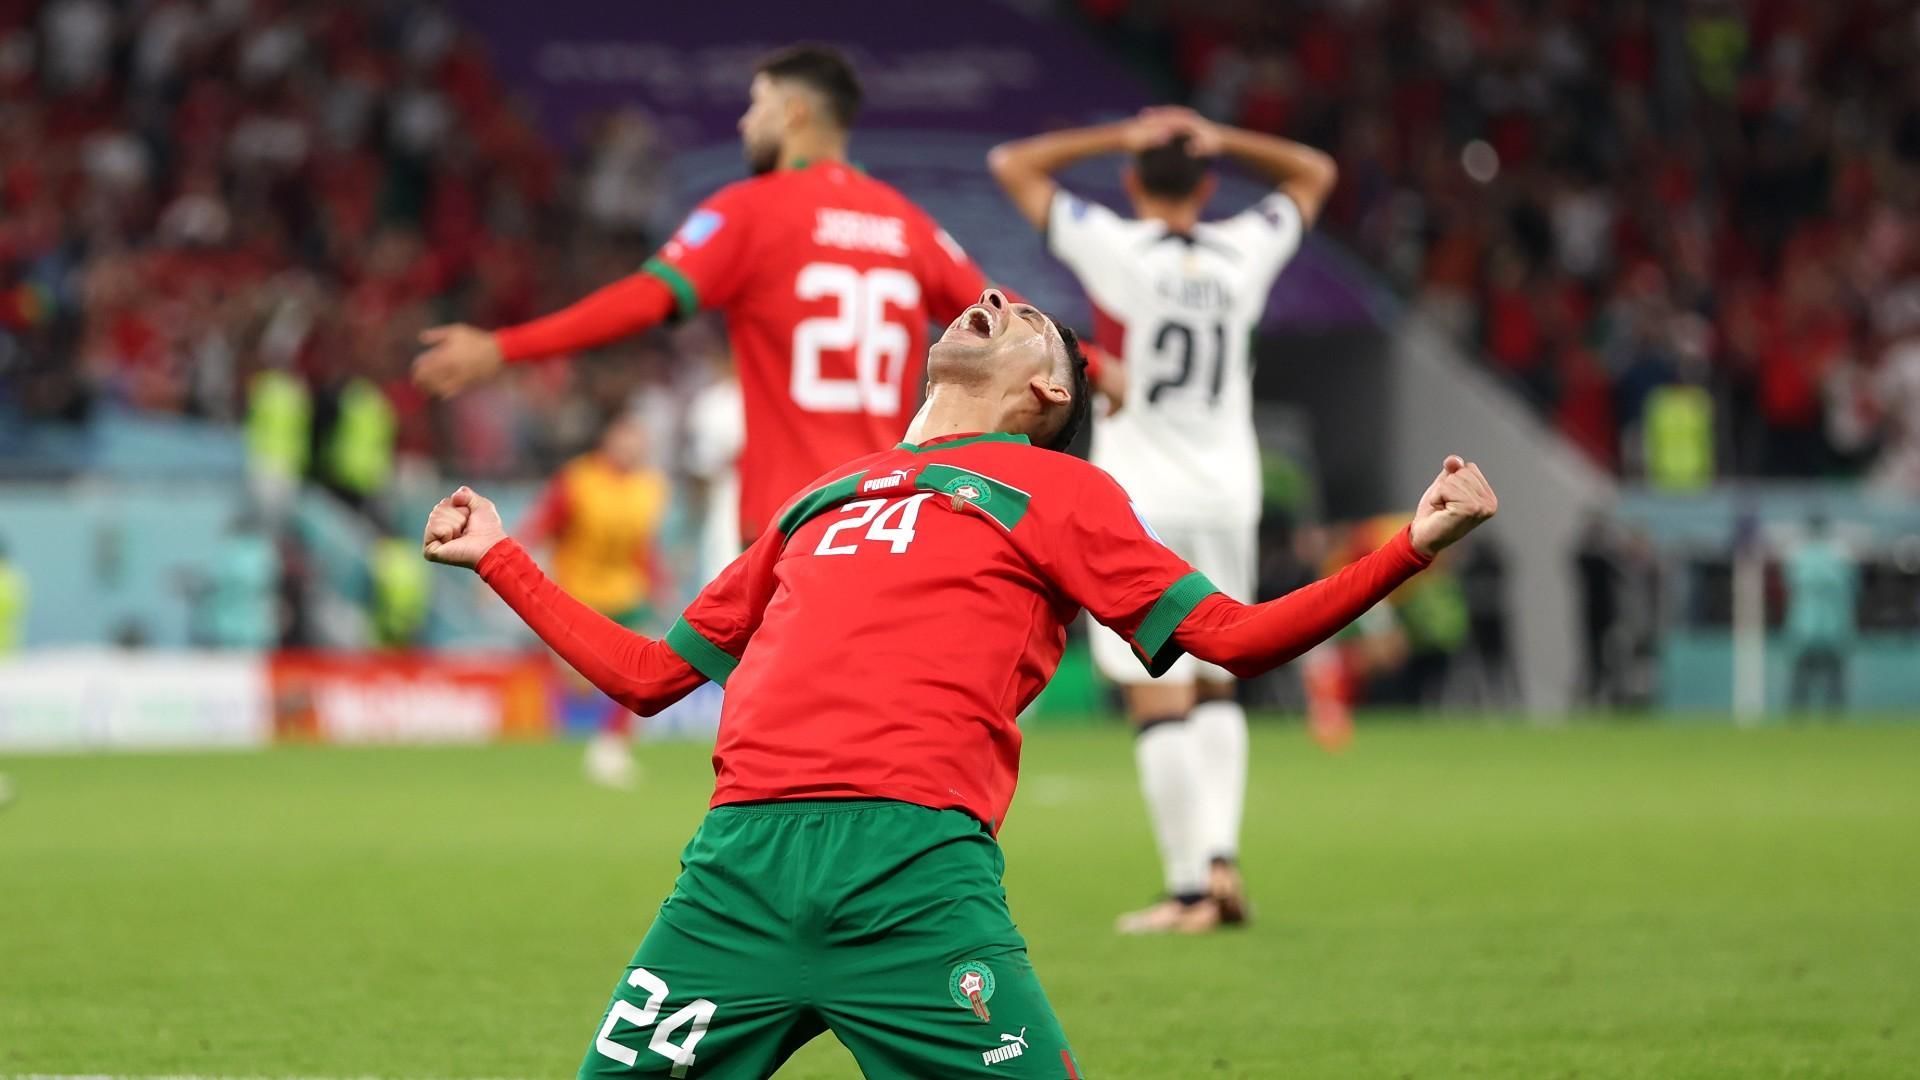 Football agent Paulo Barbosa: Portugal underestimated Morocco, the opponent looked better throughout the match